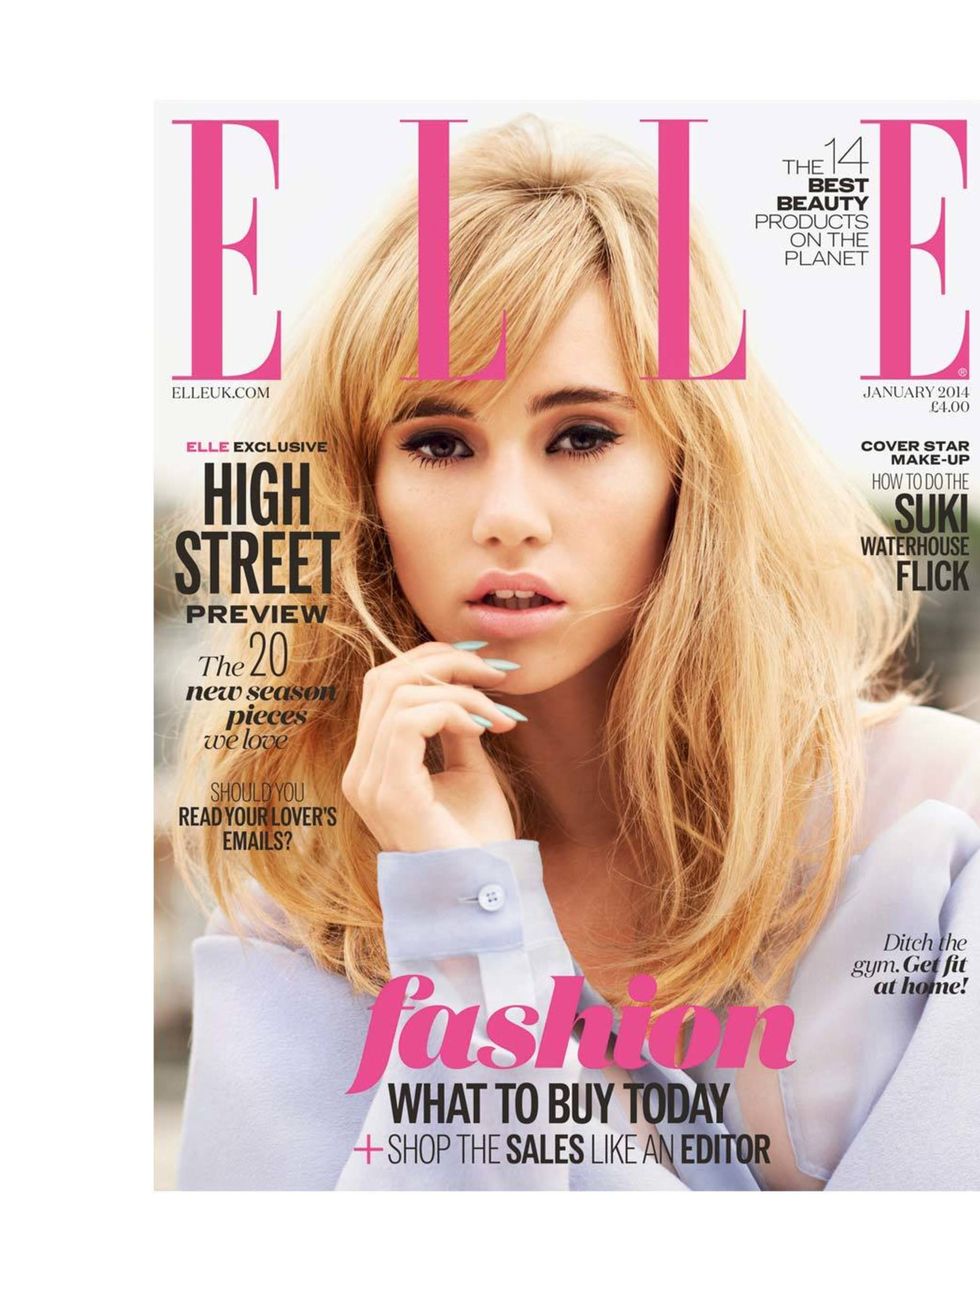 <p>Flick to page 162 of your January issue (on sale now) to see the 14 products that 44 ELLE Beauty Directors from around the globe have singled out as the best products on the planet in the ELLE International Beauty Awards 2013.</p><p><em><a href="https: